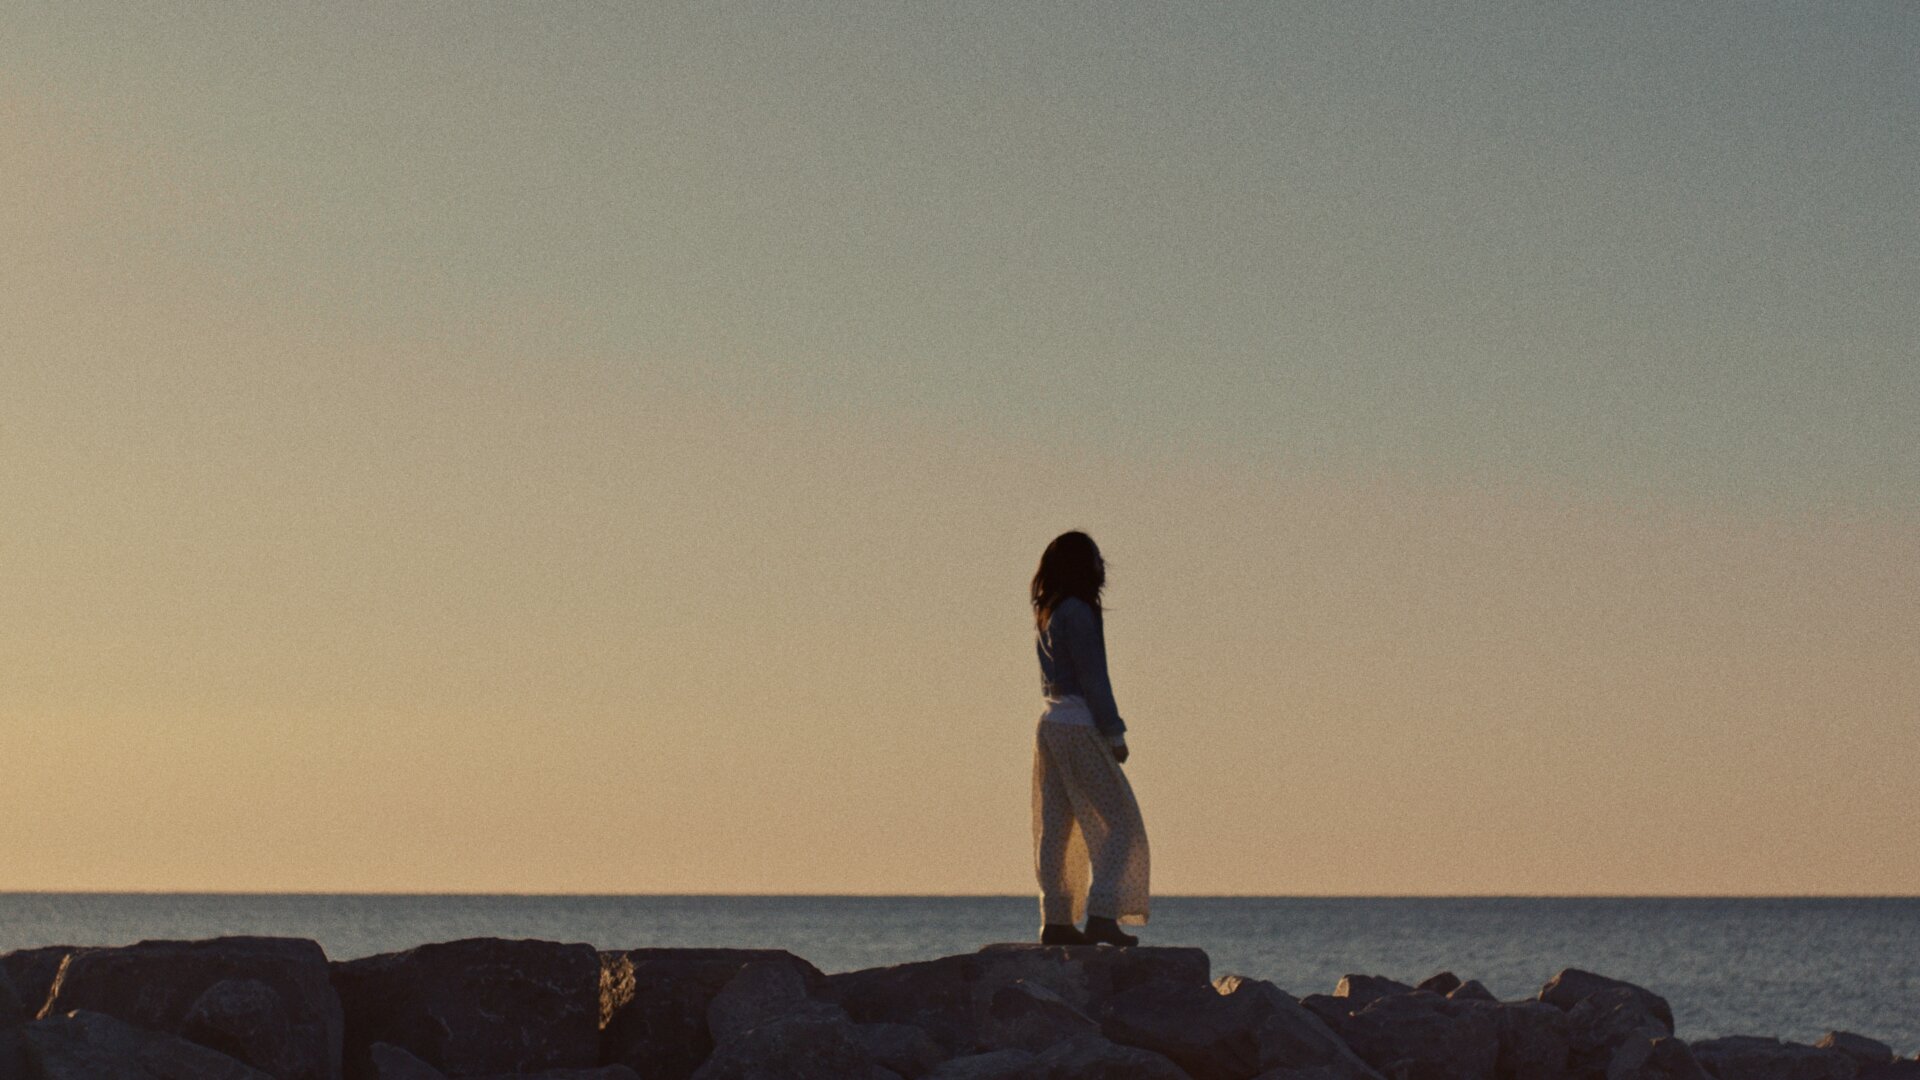 Girl looks out to ocean, scene from The Kiln video production